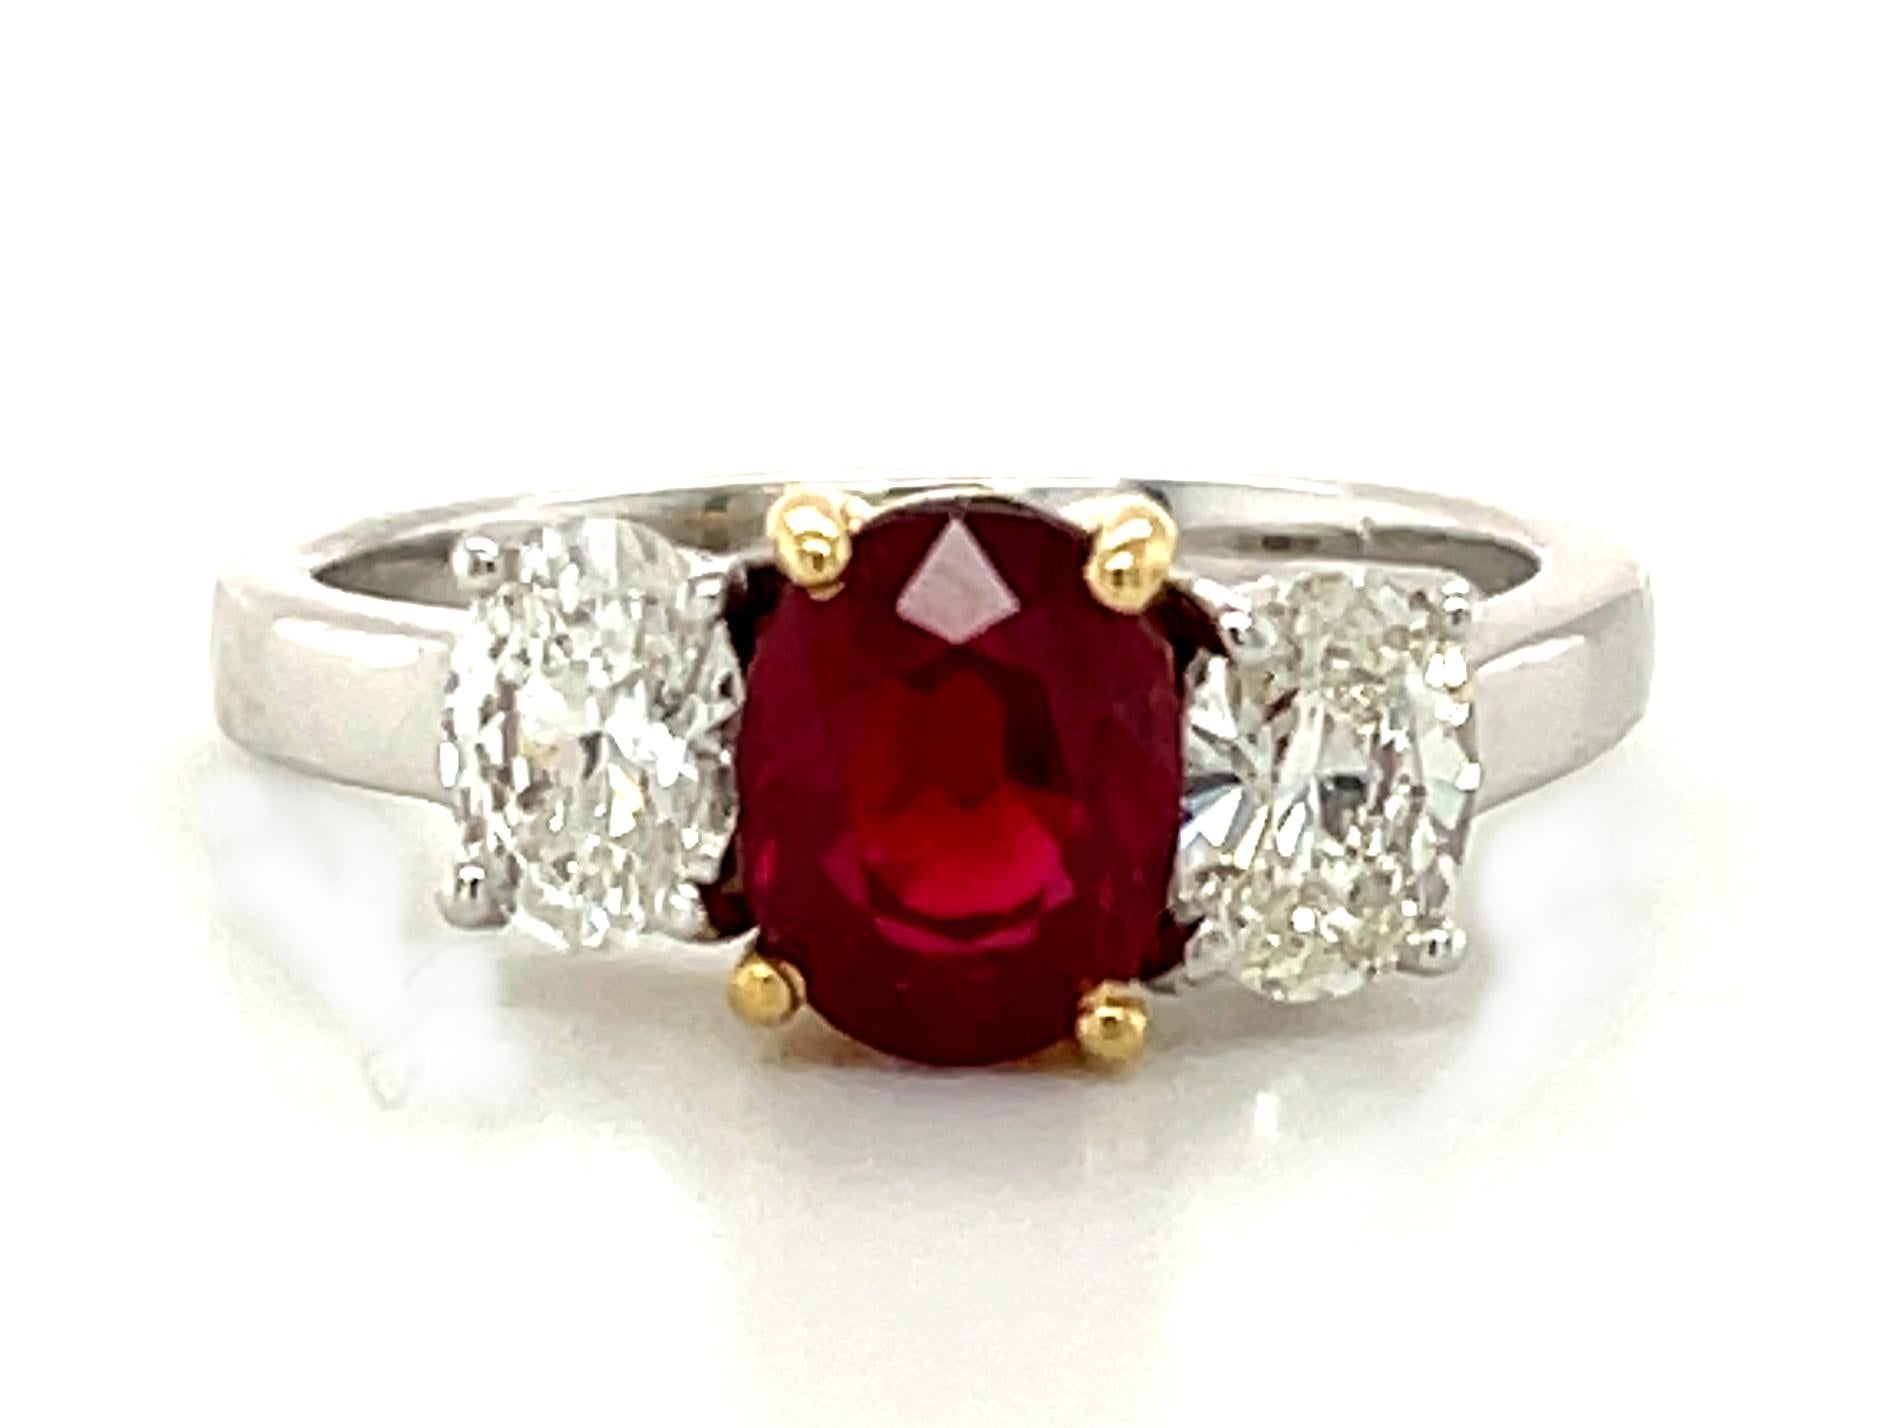 The color of passion! A gorgeous, intense red, oval Burmese ruby is featured in this classic 3-stone ring. The center stone is set in yellow gold and flanked by a matched pair of fine oval brilliant cut diamonds set in 18k white gold. Handmade by